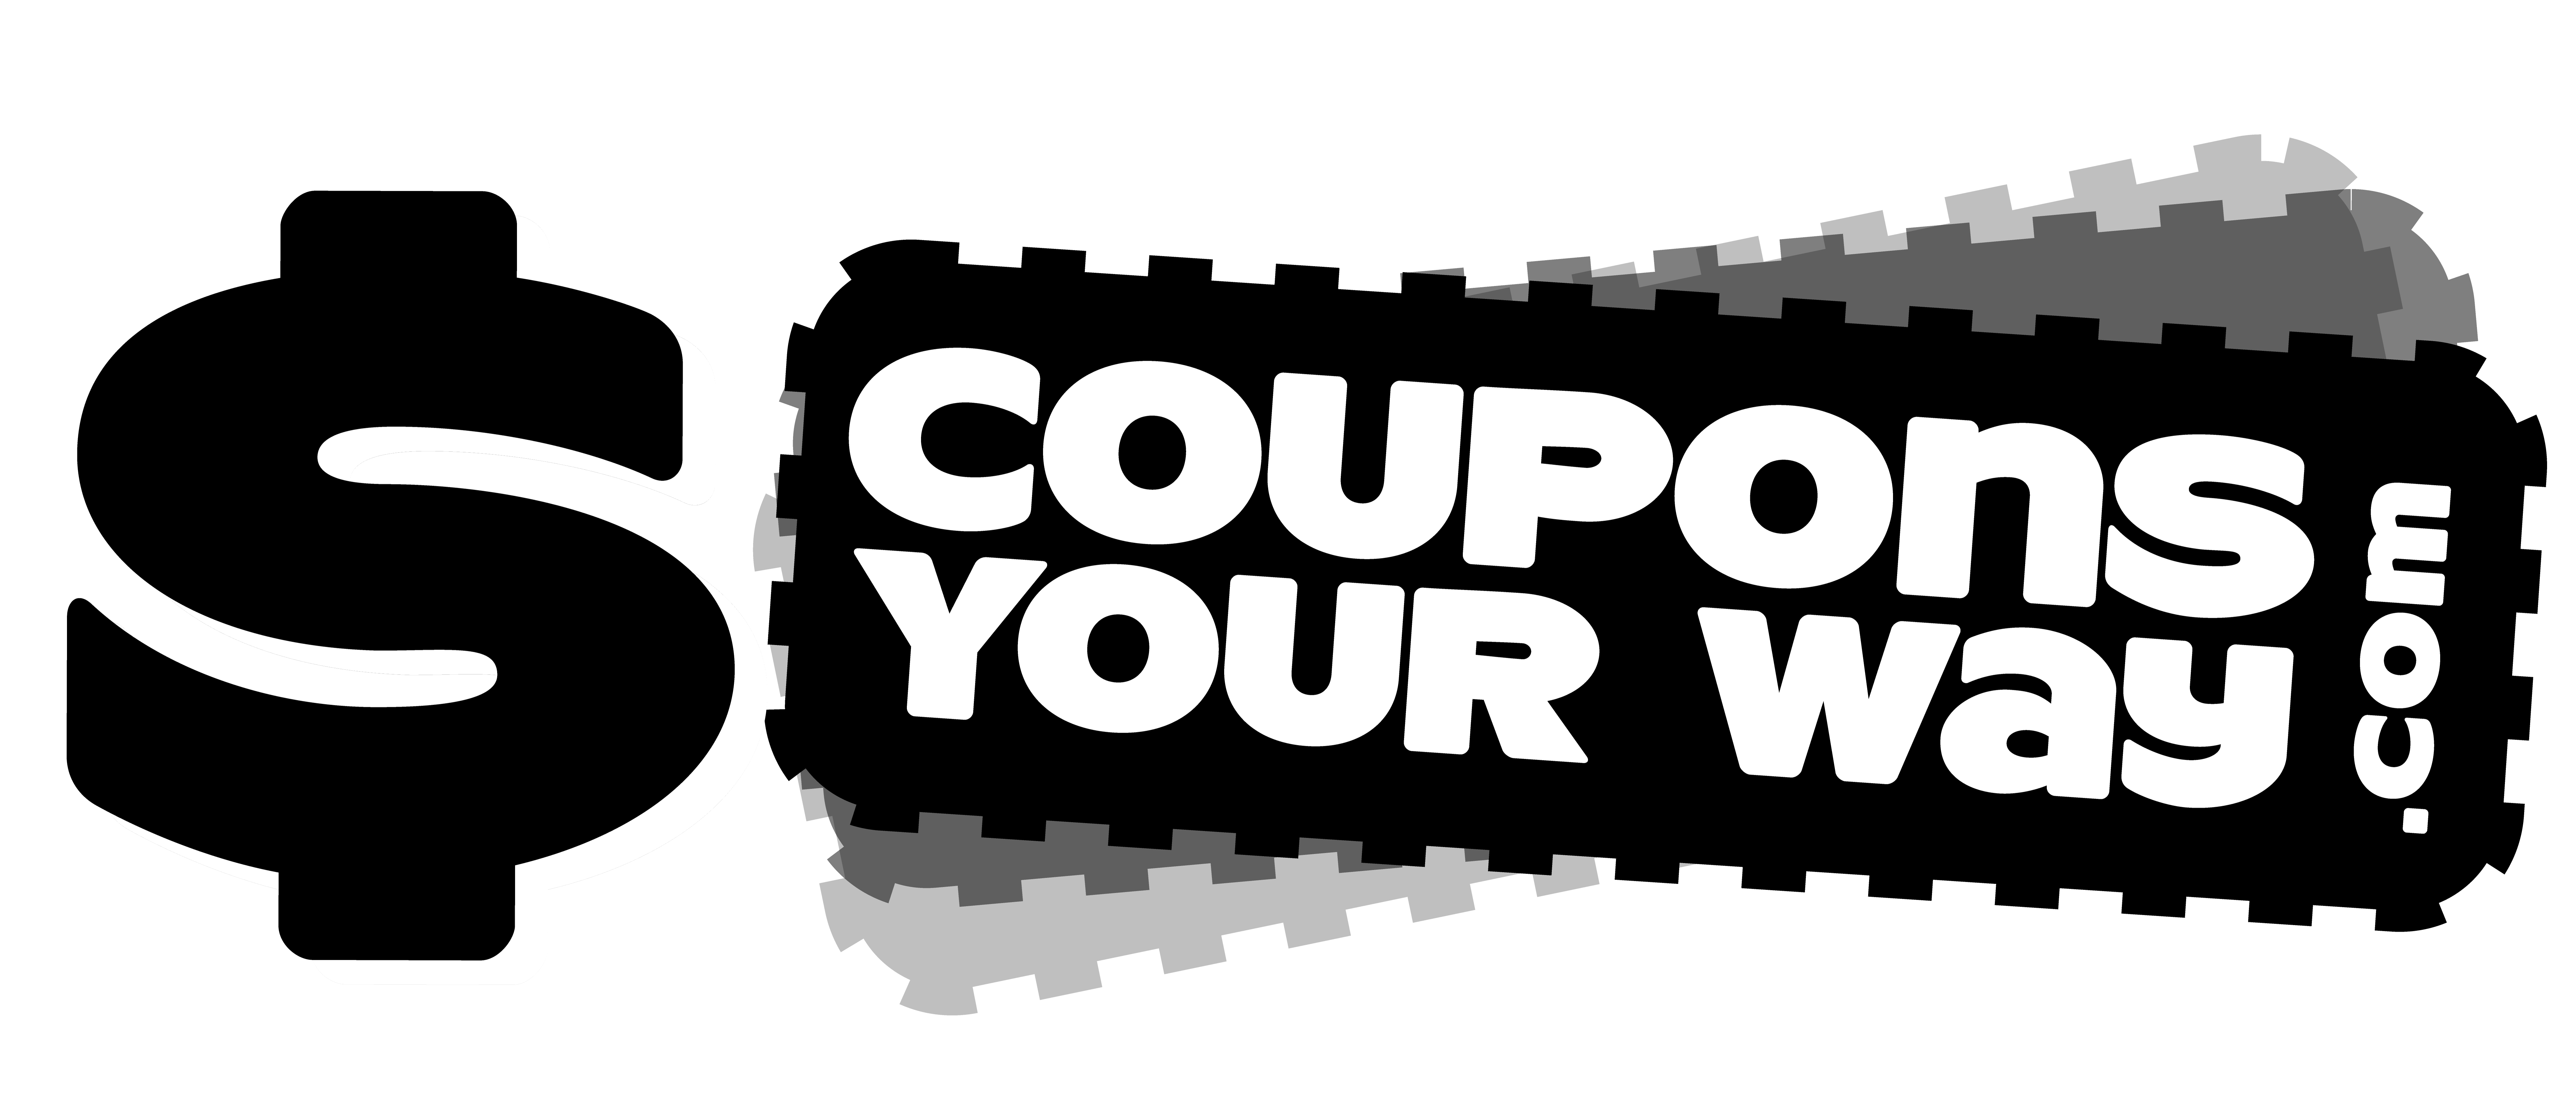 Coupons Your Way